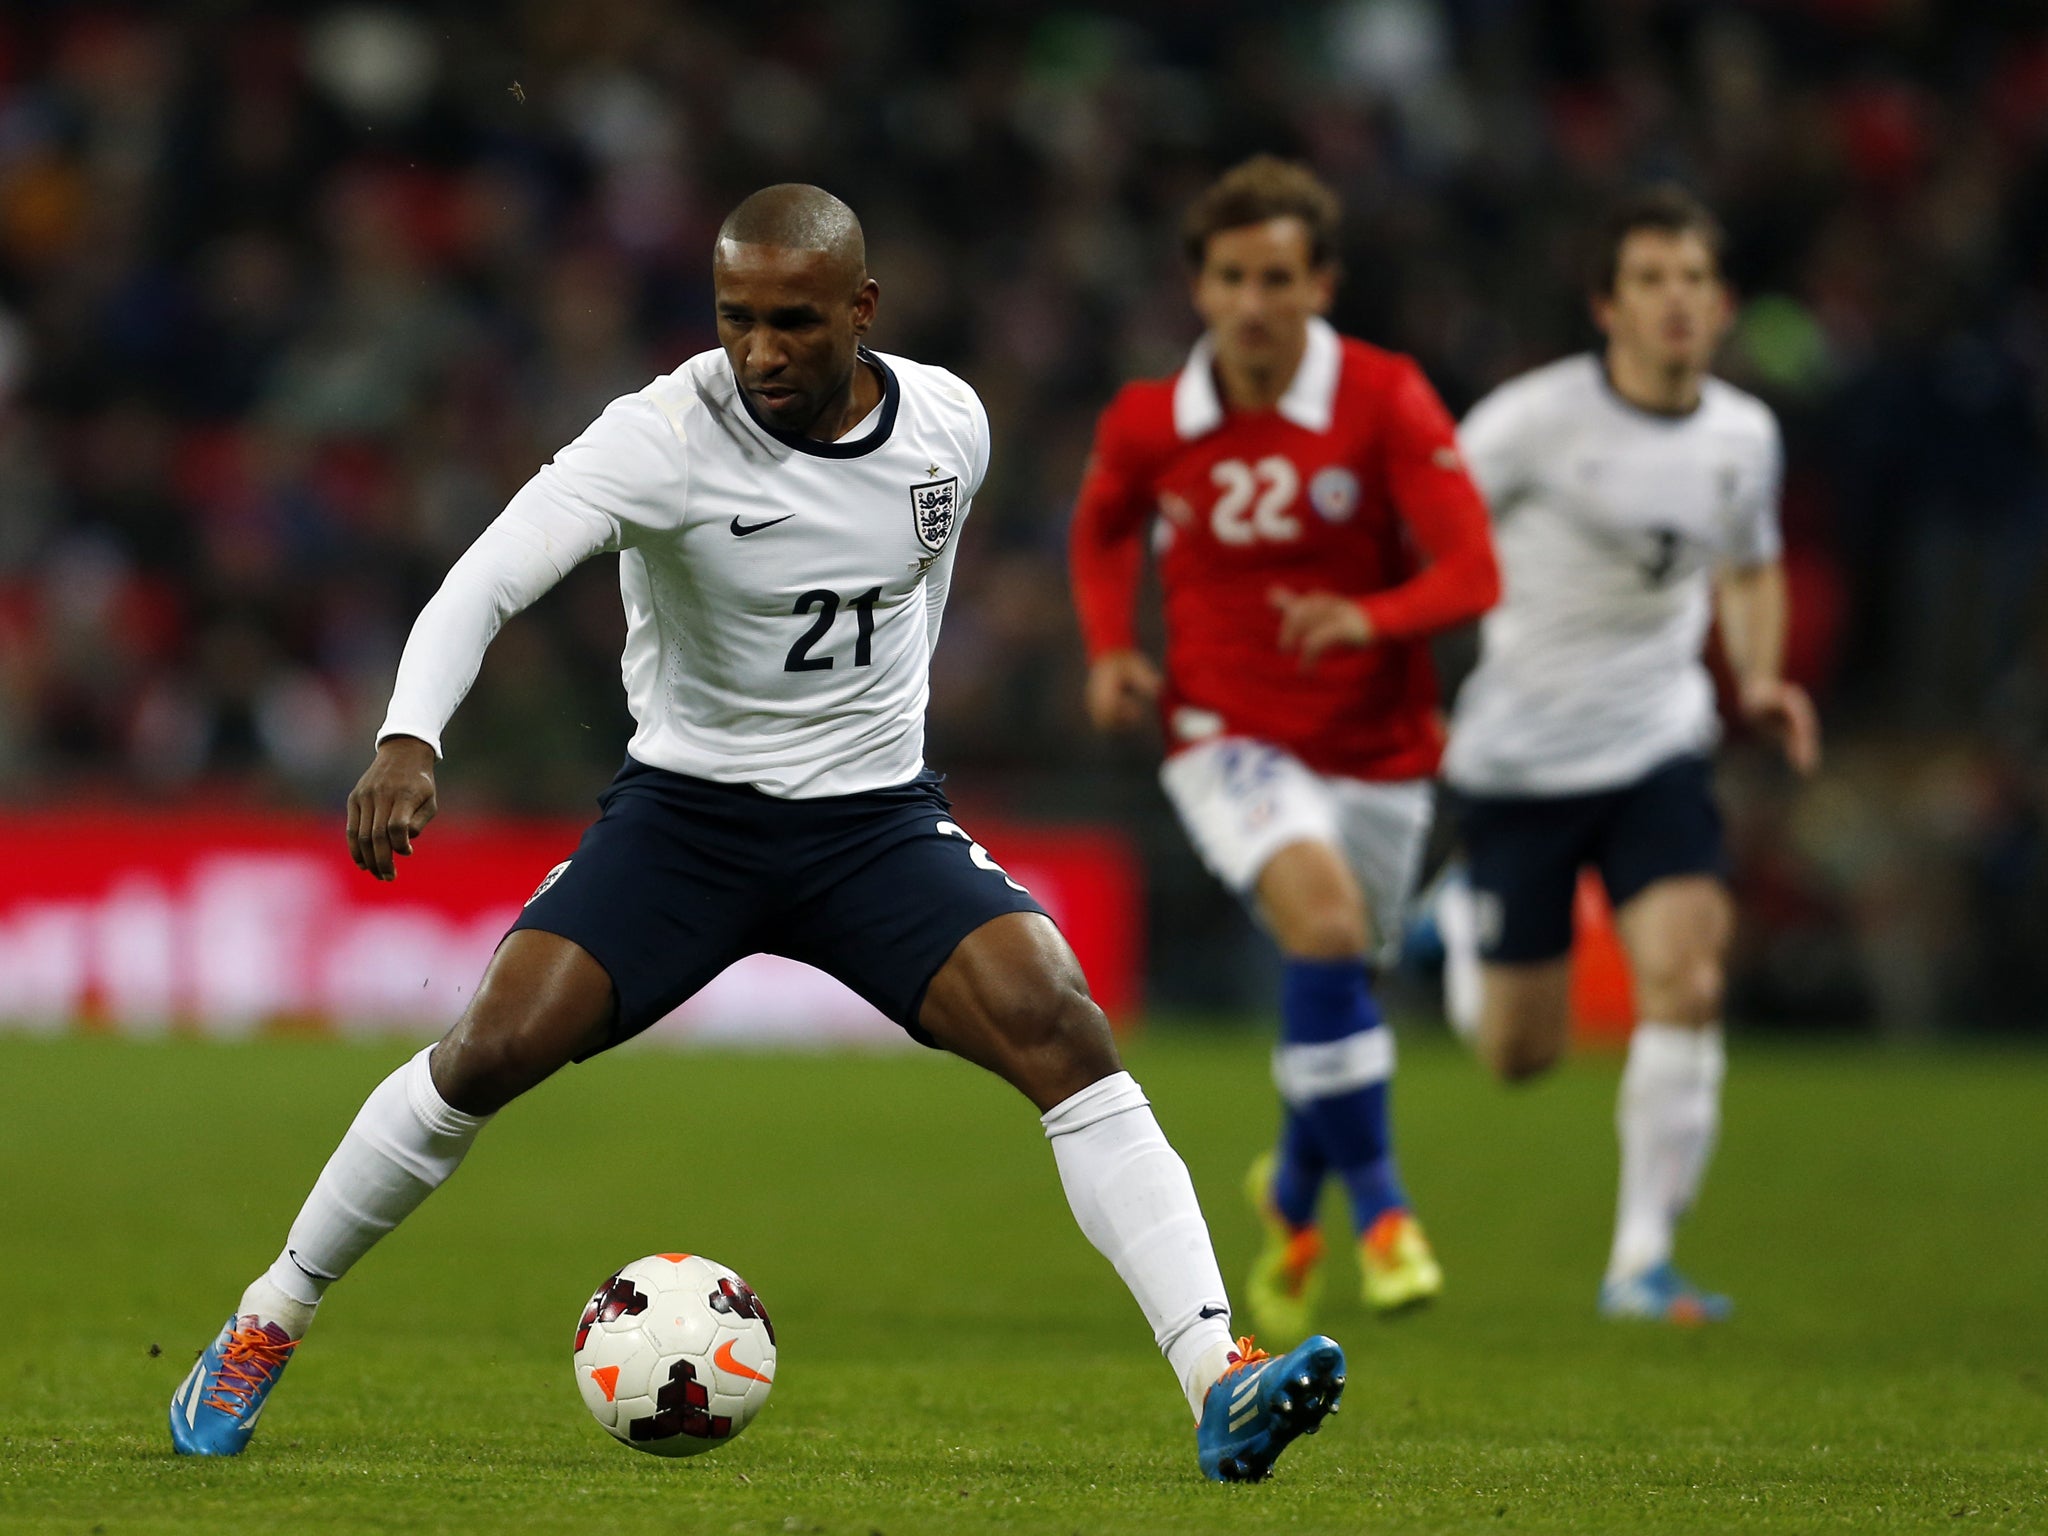 Tottenham striker Jermain Defoe accepts that his World Cup hopes with England are diminishing the longer Andre Villas-Boas keeps him on the bench